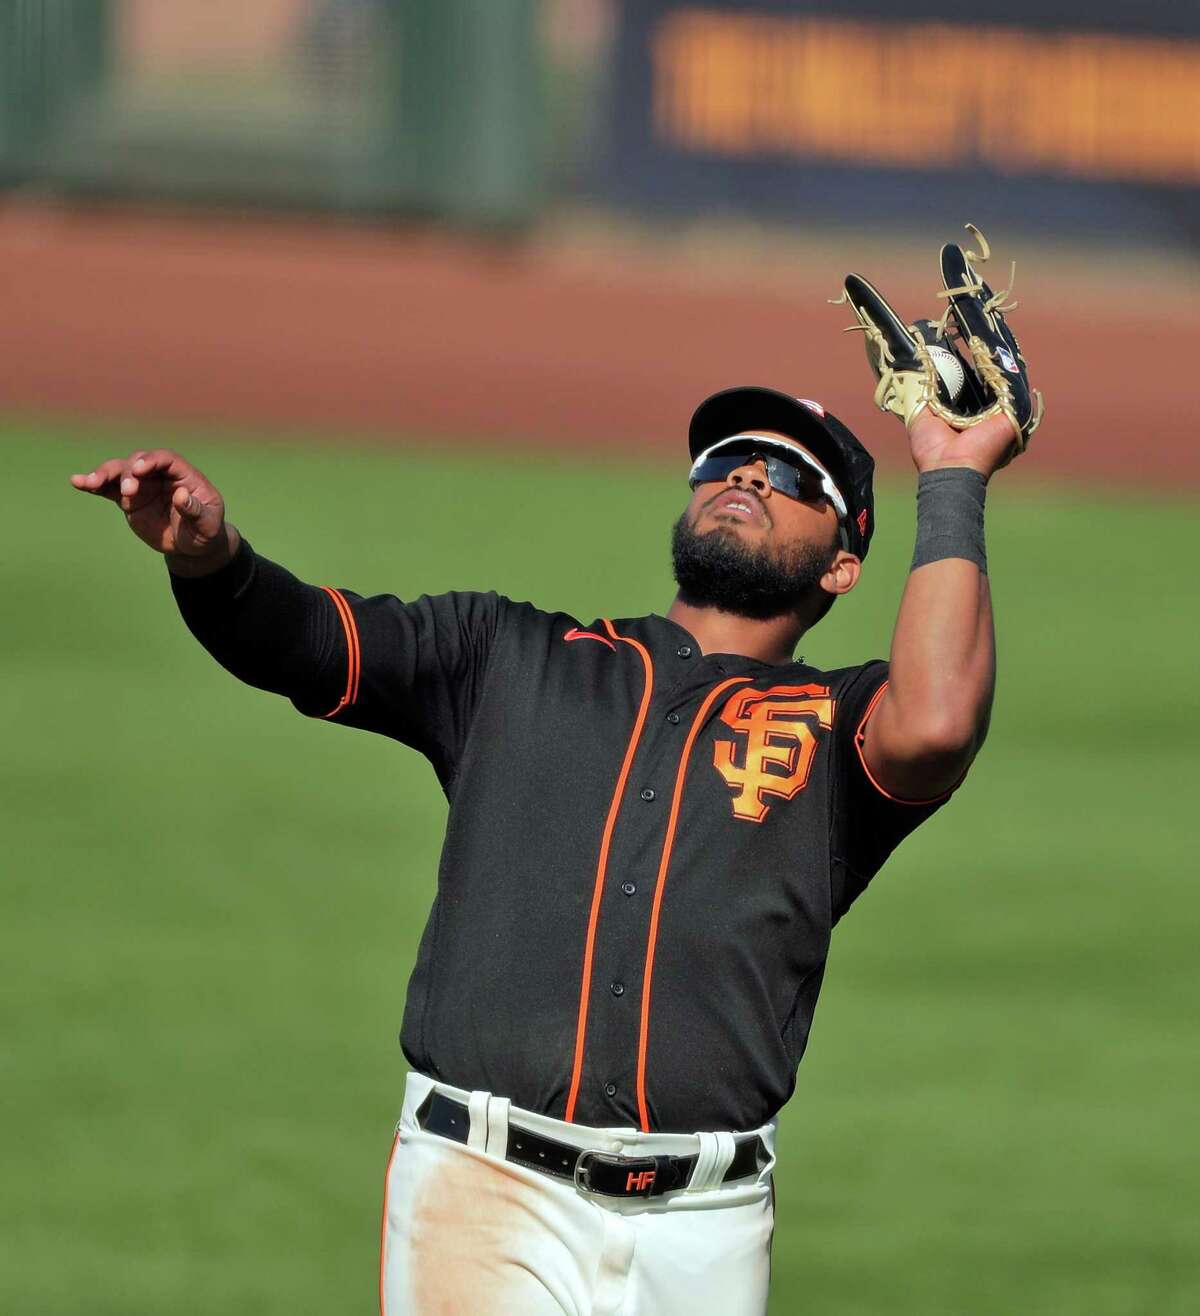 Heliot Ramos (80) makes a catch in the sixth inning as the San Francisco Giants played the Chicago White Sox in a spring training game at Scottsdale Stadium in Scottsdale, Ariz., on Thursday, March 4, 2021.